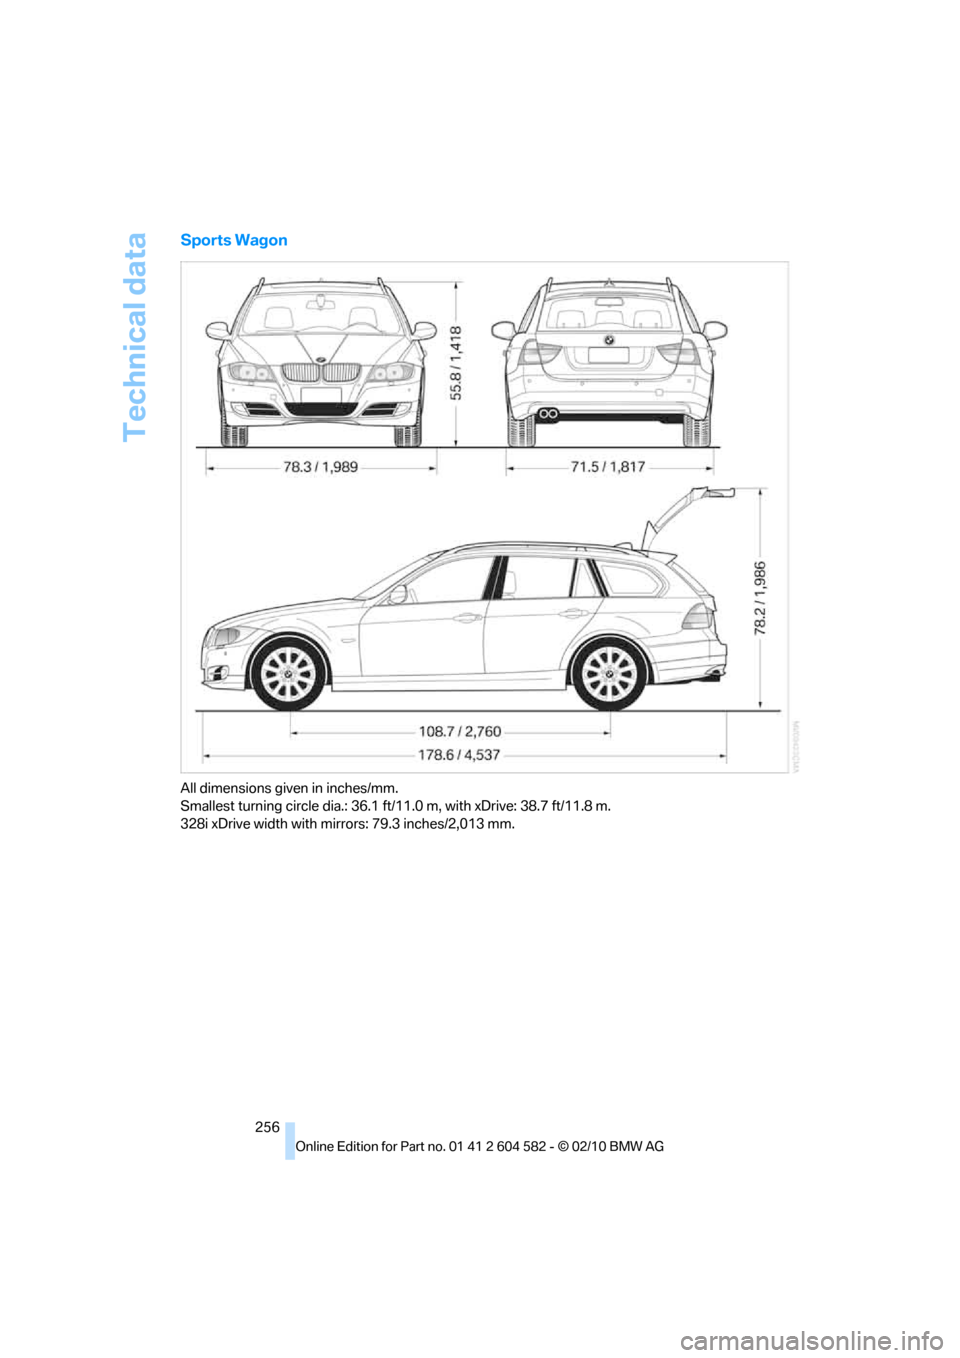 BMW 335I 2011 E90 Owners Manual Technical data
256
Sports Wagon
All dimensions given in inches/mm. 
Smallest turning circle dia.: 36.1 ft/11.0 m, with xDrive: 38.7 ft/11.8 m.
328i xDrive width with mirrors: 79.3 inches/2,013 mm. 